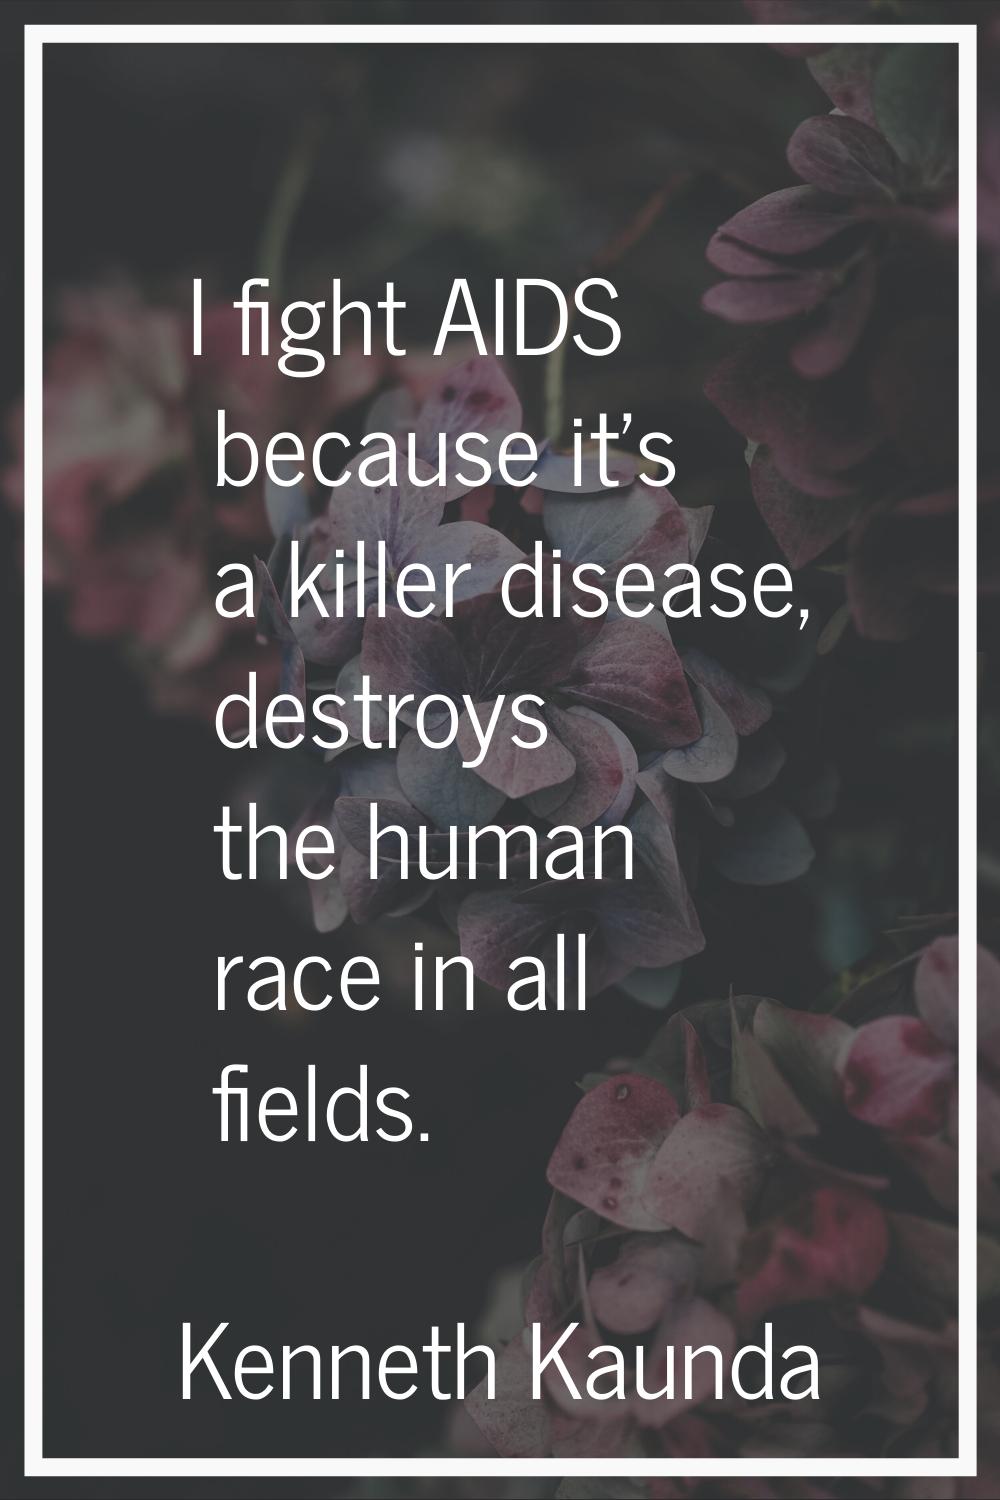 I fight AIDS because it's a killer disease, destroys the human race in all fields.